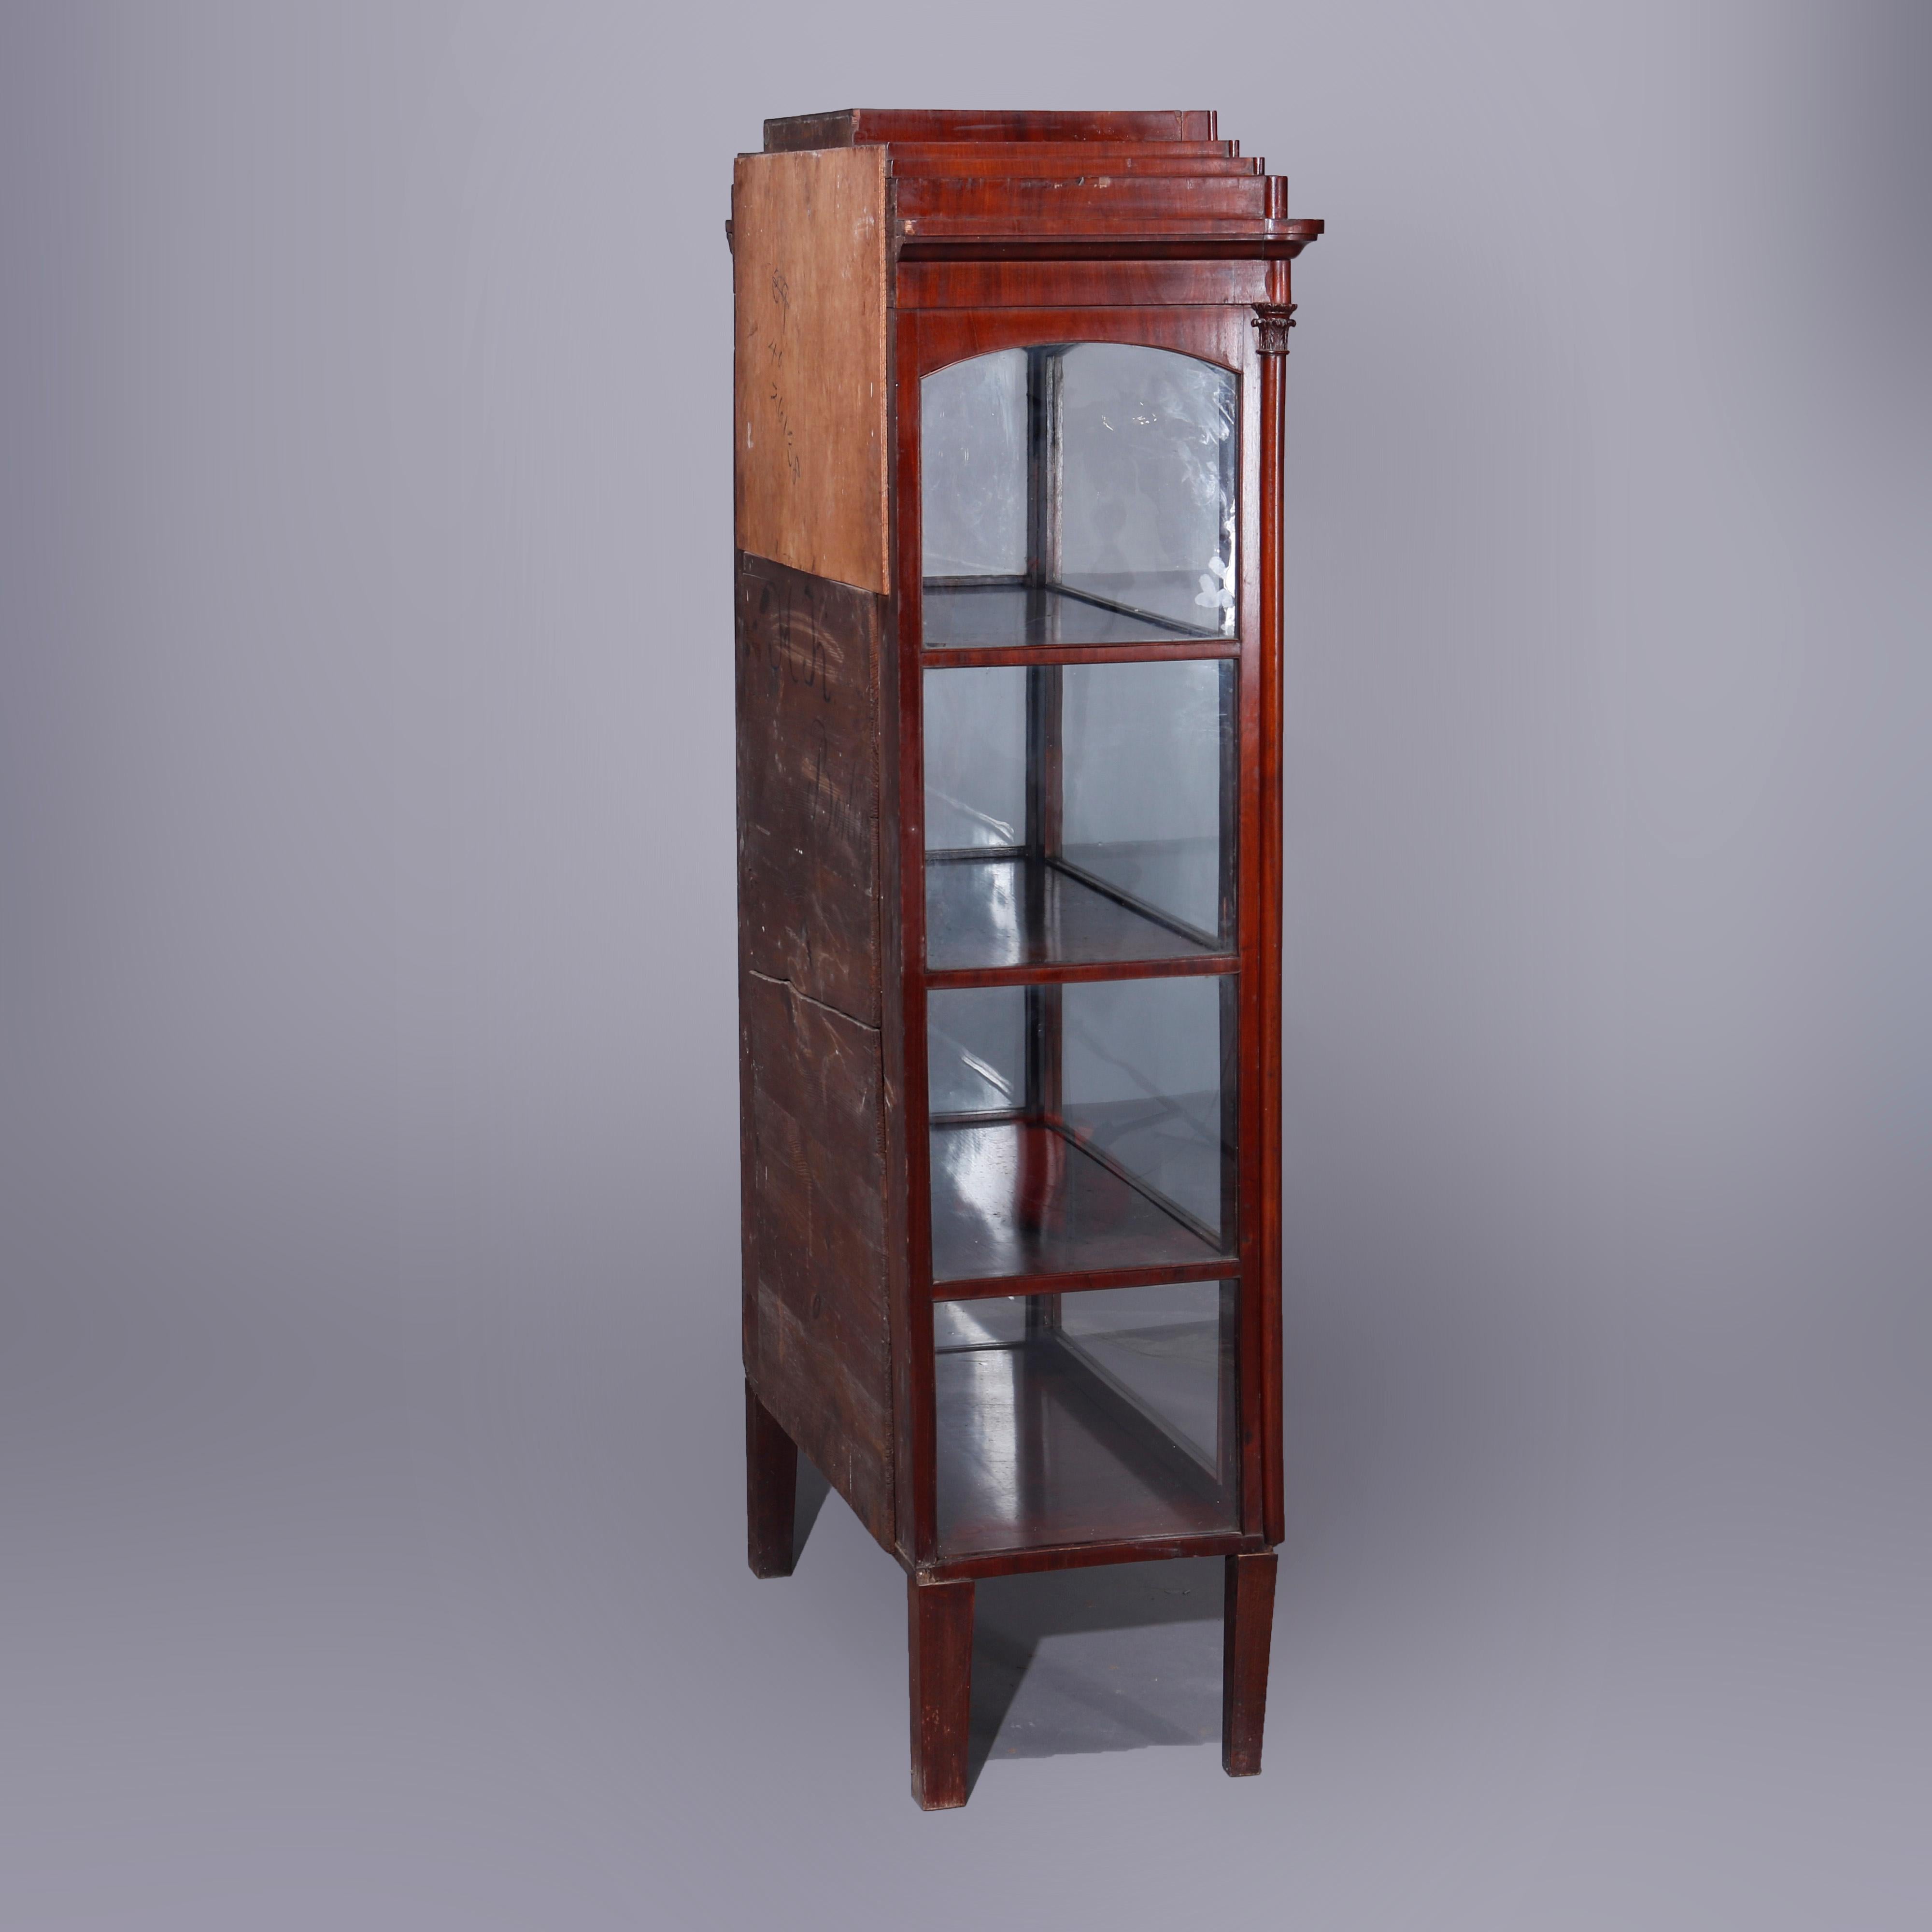 Antique Second American Empire Grecian Flame Mahogany Mirrored Vitrine, c1870 In Good Condition For Sale In Big Flats, NY